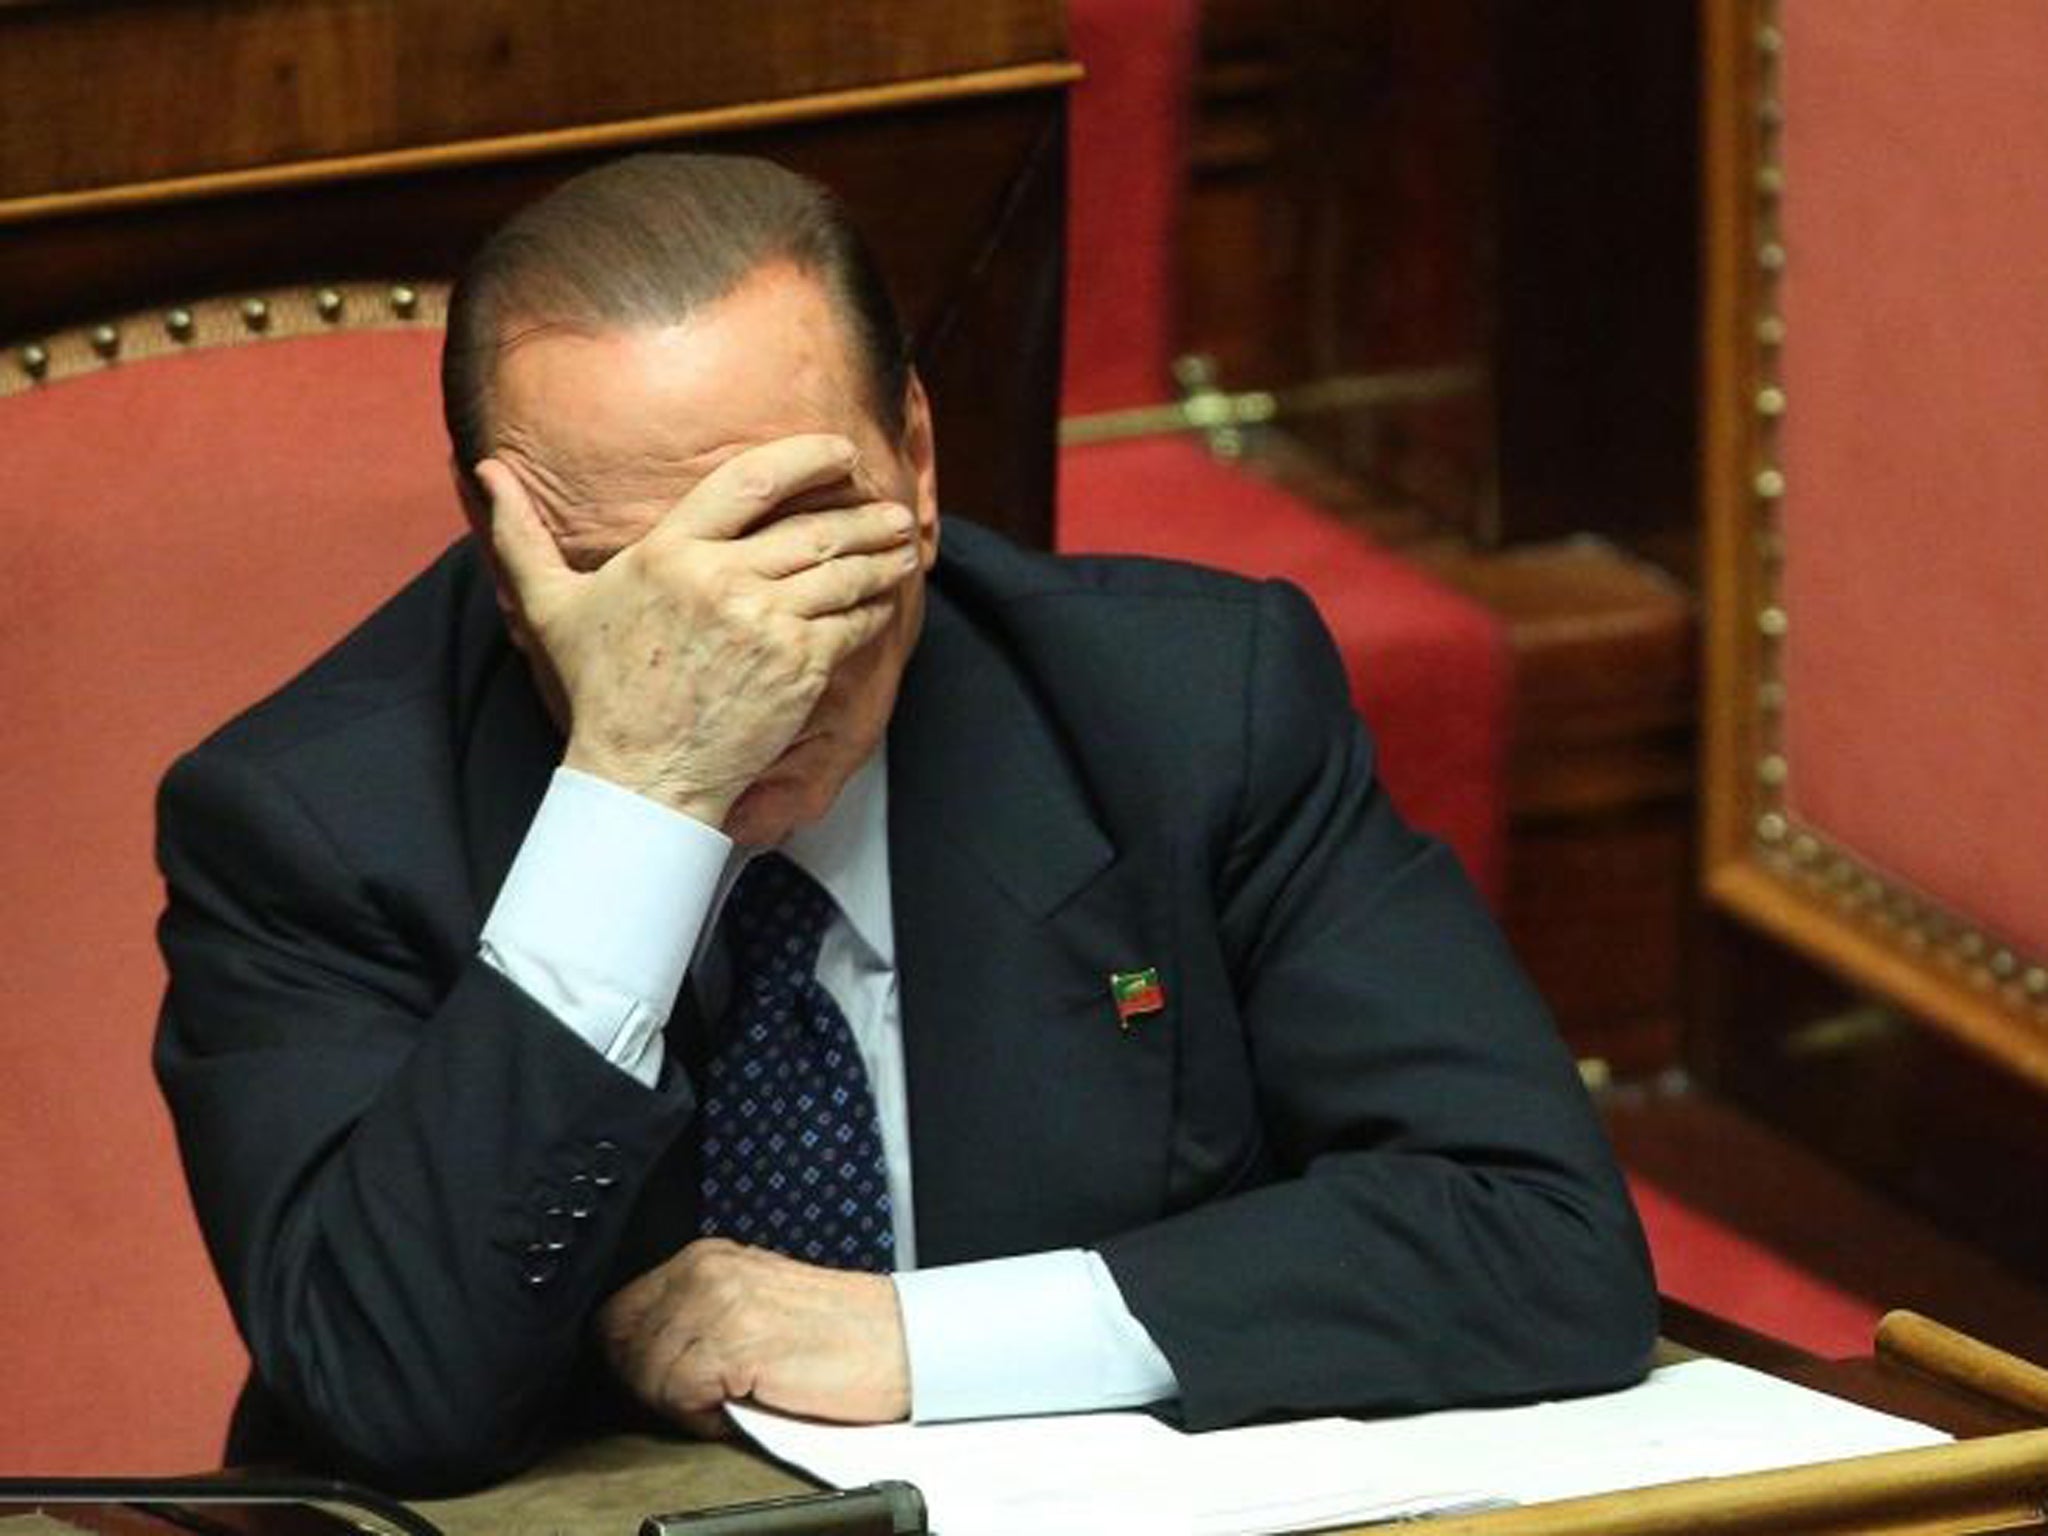 The accusation comes just two days after the Italian Senate expelled Berlusconi from Parliament over his tax fraud conviction